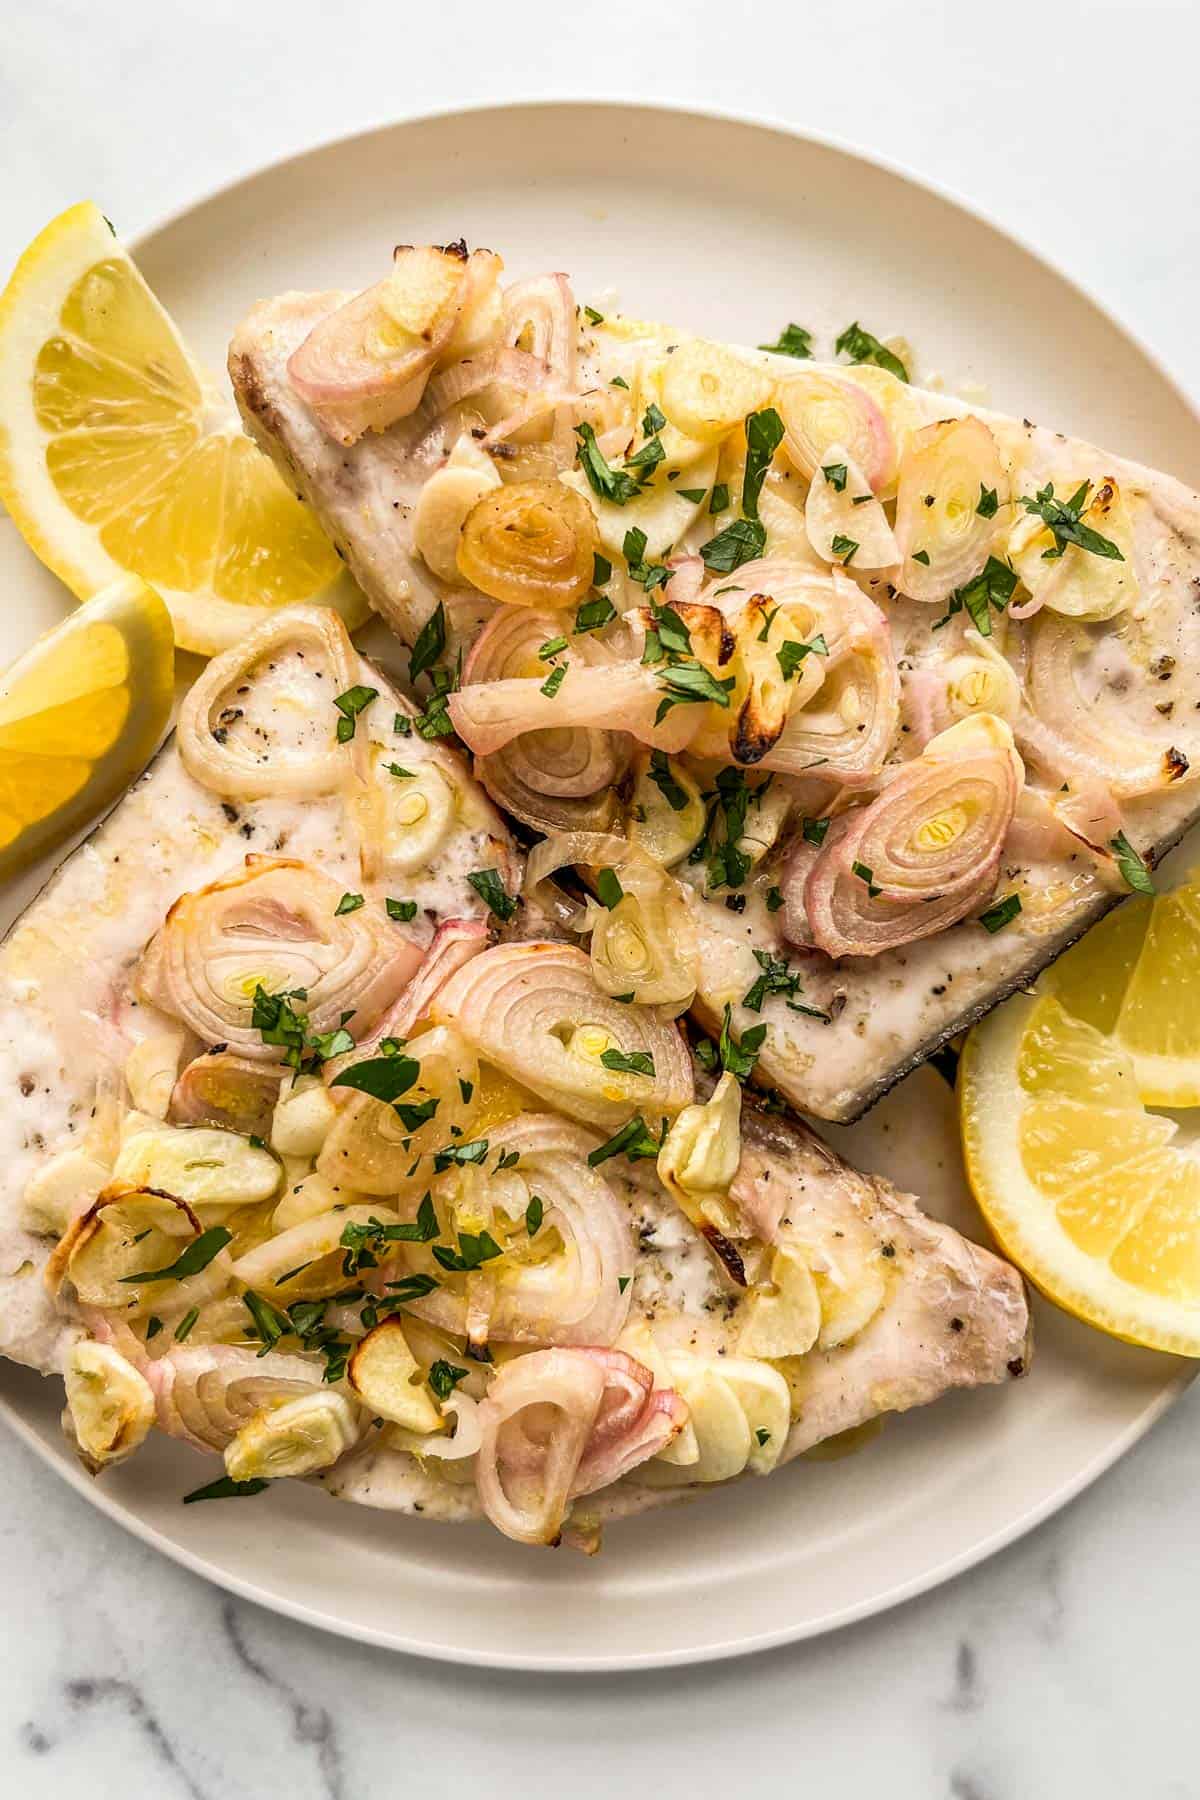 Baked swordfish with lemon and shallots on a white plate.